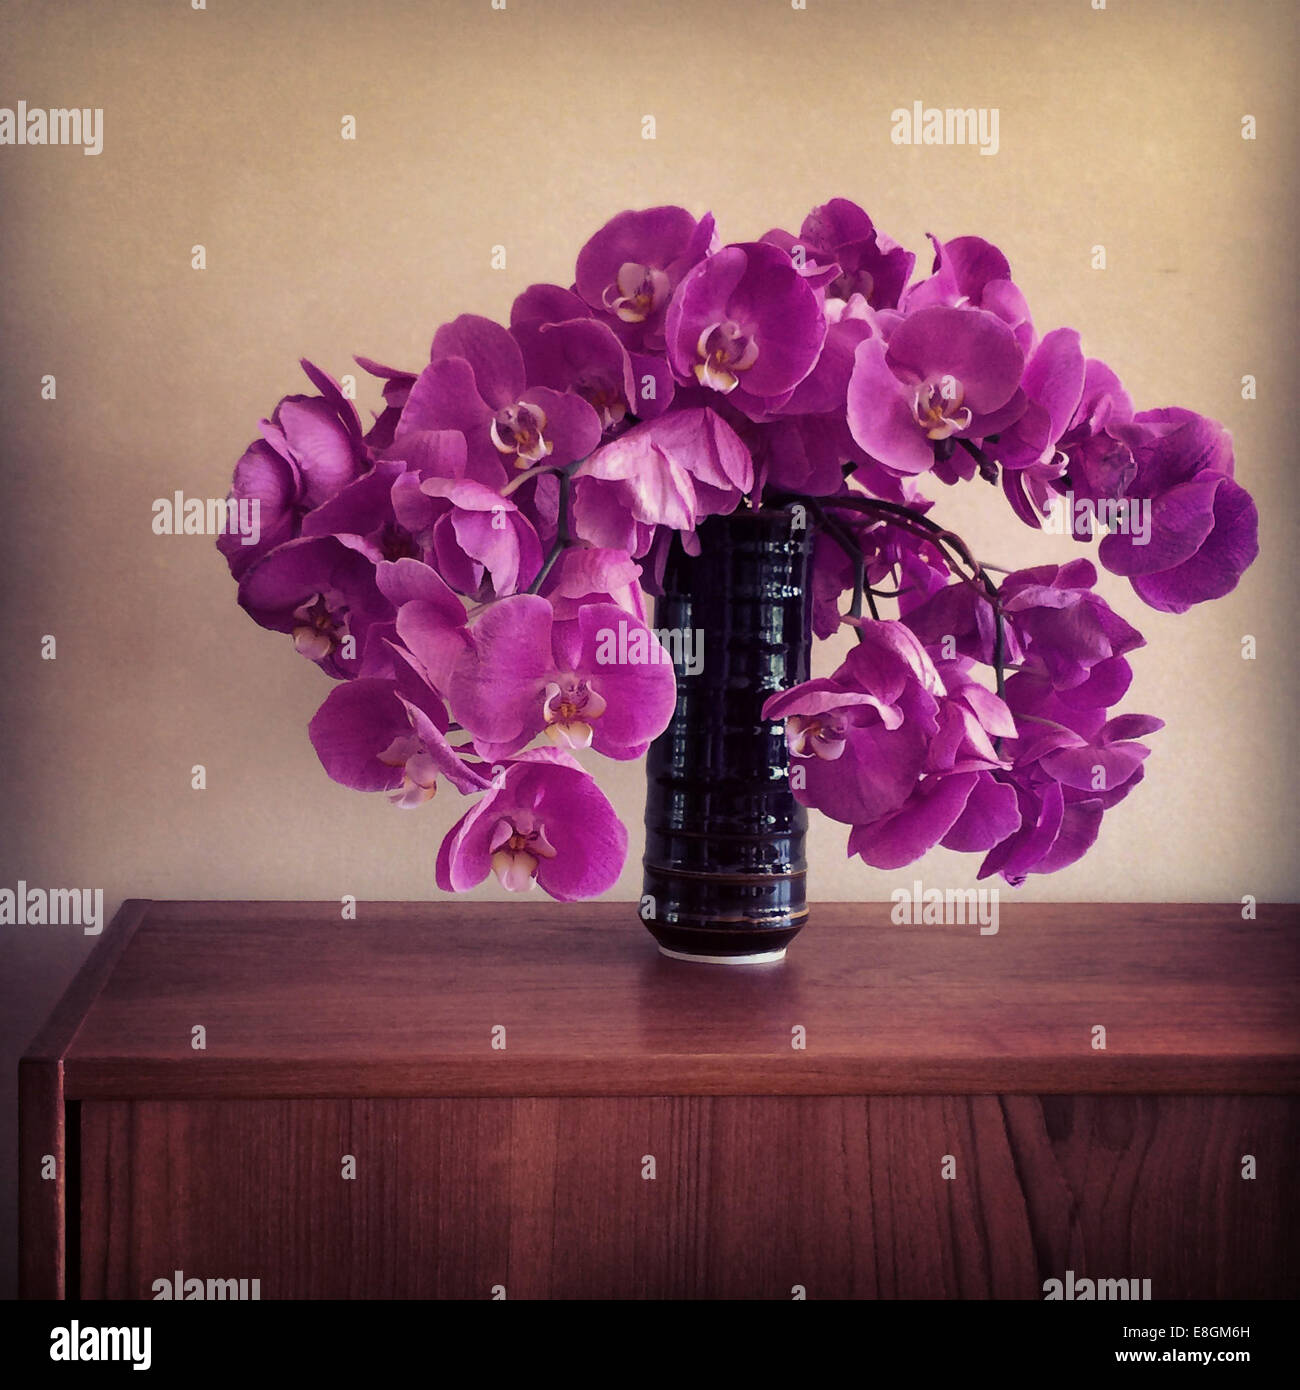 Orchids in vase Stock Photo